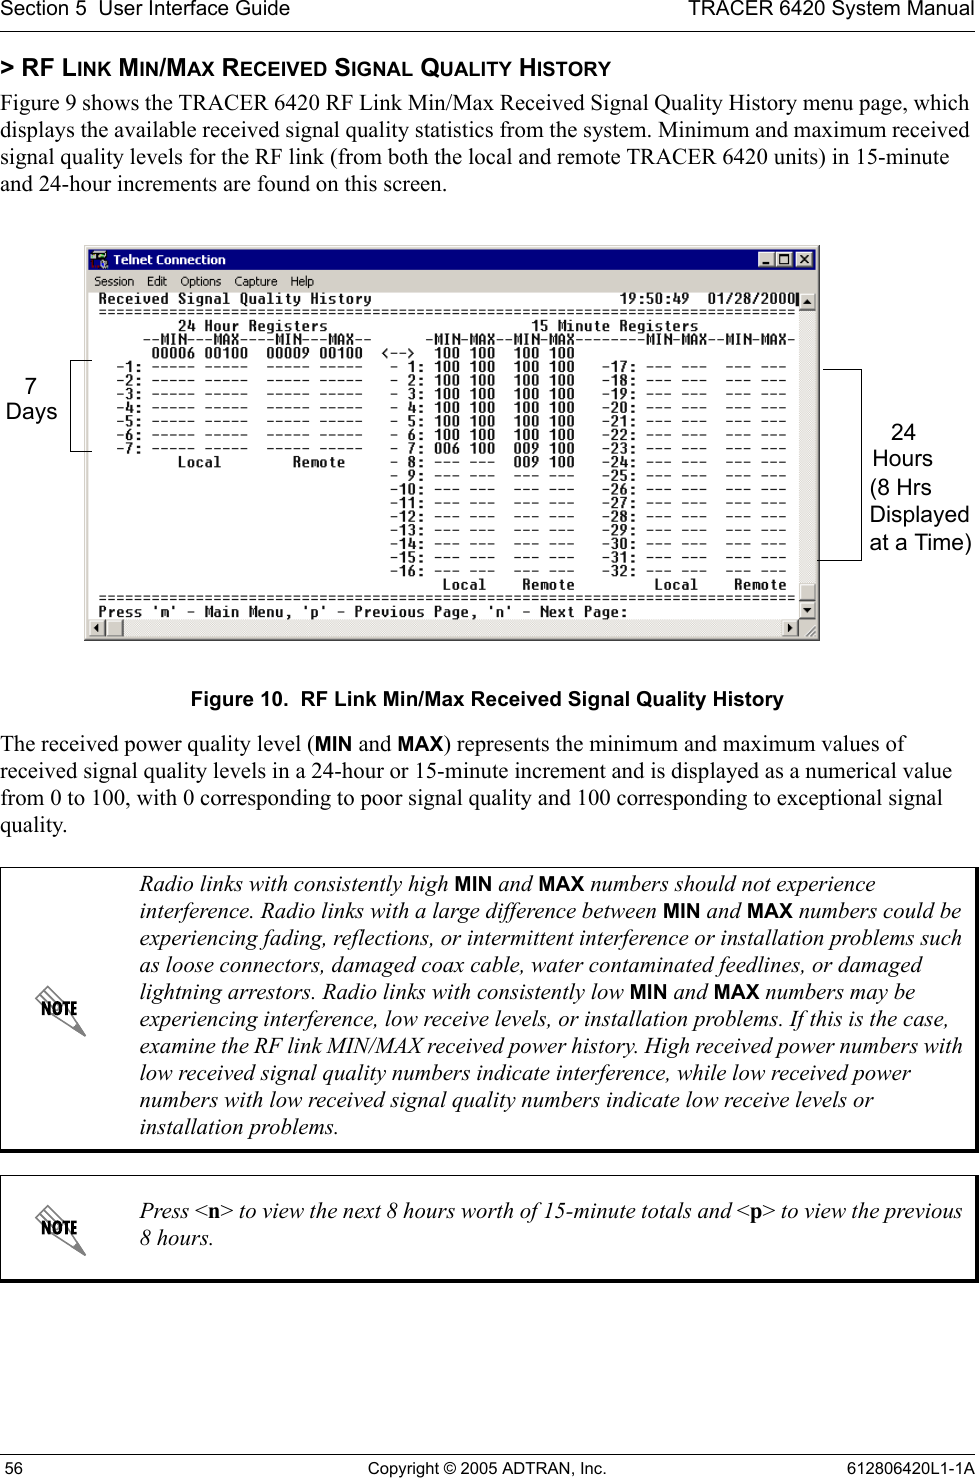 Section 5  User Interface Guide TRACER 6420 System Manual 56 Copyright © 2005 ADTRAN, Inc. 612806420L1-1A&gt; RF LINK MIN/MAX RECEIVED SIGNAL QUALITY HISTORYFigure 9 shows the TRACER 6420 RF Link Min/Max Received Signal Quality History menu page, which displays the available received signal quality statistics from the system. Minimum and maximum received signal quality levels for the RF link (from both the local and remote TRACER 6420 units) in 15-minute and 24-hour increments are found on this screen. Figure 10.  RF Link Min/Max Received Signal Quality HistoryThe received power quality level (MIN and MAX) represents the minimum and maximum values of received signal quality levels in a 24-hour or 15-minute increment and is displayed as a numerical value from 0 to 100, with 0 corresponding to poor signal quality and 100 corresponding to exceptional signal quality.Radio links with consistently high MIN and MAX numbers should not experience interference. Radio links with a large difference between MIN and MAX numbers could be experiencing fading, reflections, or intermittent interference or installation problems such as loose connectors, damaged coax cable, water contaminated feedlines, or damaged lightning arrestors. Radio links with consistently low MIN and MAX numbers may be experiencing interference, low receive levels, or installation problems. If this is the case, examine the RF link MIN/MAX received power history. High received power numbers with low received signal quality numbers indicate interference, while low received power numbers with low received signal quality numbers indicate low receive levels or installation problems.Press &lt;n&gt; to view the next 8 hours worth of 15-minute totals and &lt;p&gt; to view the previous 8 hours.7Days 24Hours(8 Hrs Displayed at a Time)